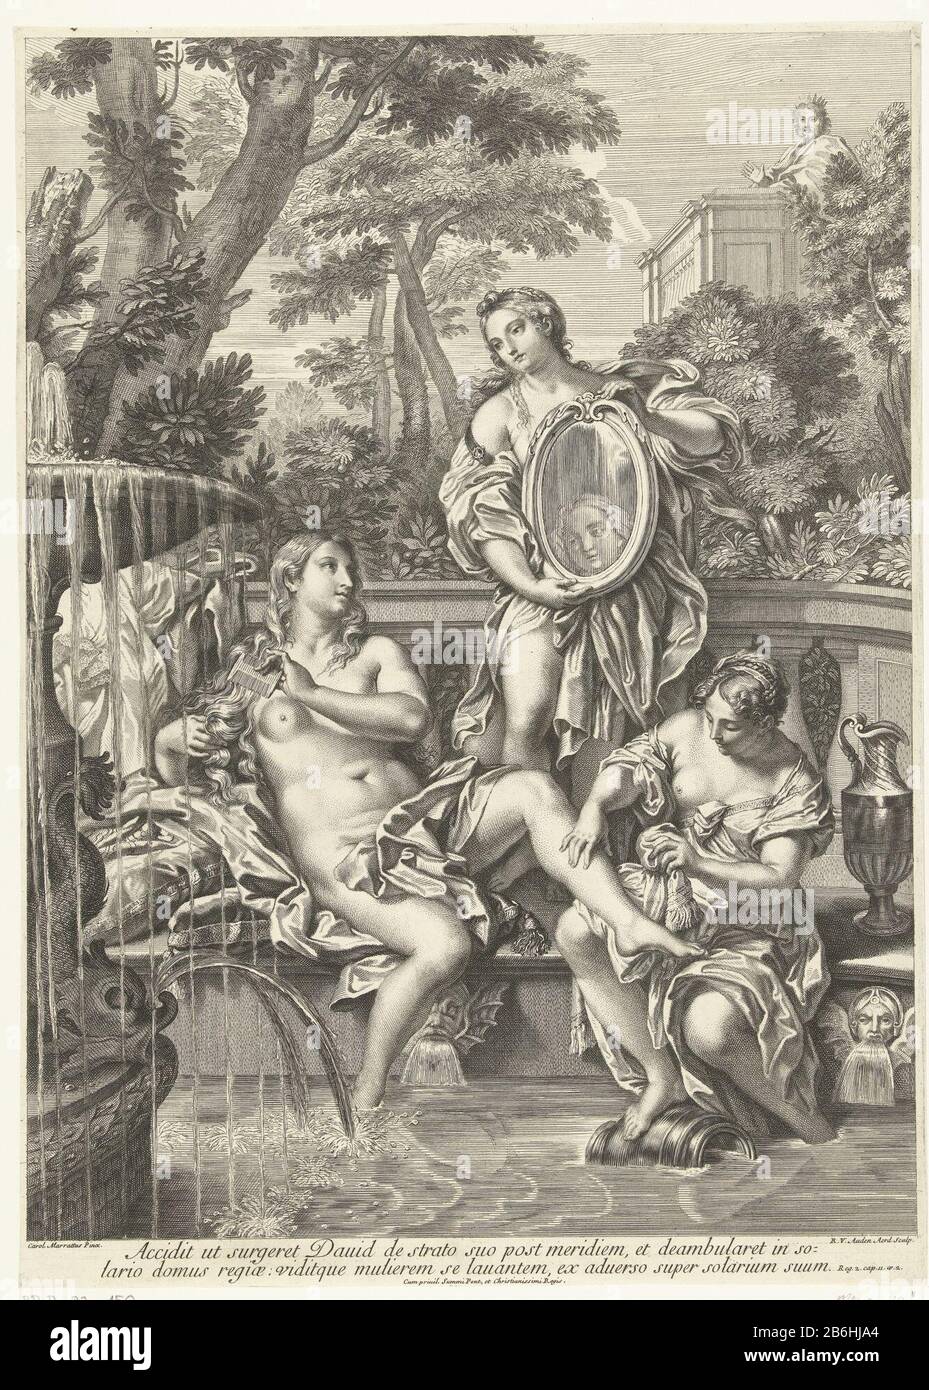 David sees Bathsheba bathing in his garden from the balcony of his palace David sees Bathsheba taking a bath in his garden. She is assisted by two attendants. Among the show a verse of two lines in the Latijn. Manufacturer : printmaker: Robert Audenaerd (listed property) to painting by Carlo Maratti (listed property) Place manufacture: Rome Date: 1685 - 1723 Physical features: engra and etching material: paper technique: engra (printing process) / etch dimensions: sheet: h 460 mm × W 332 mm Subject Bathsheba attended by servant (s) Stock Photo